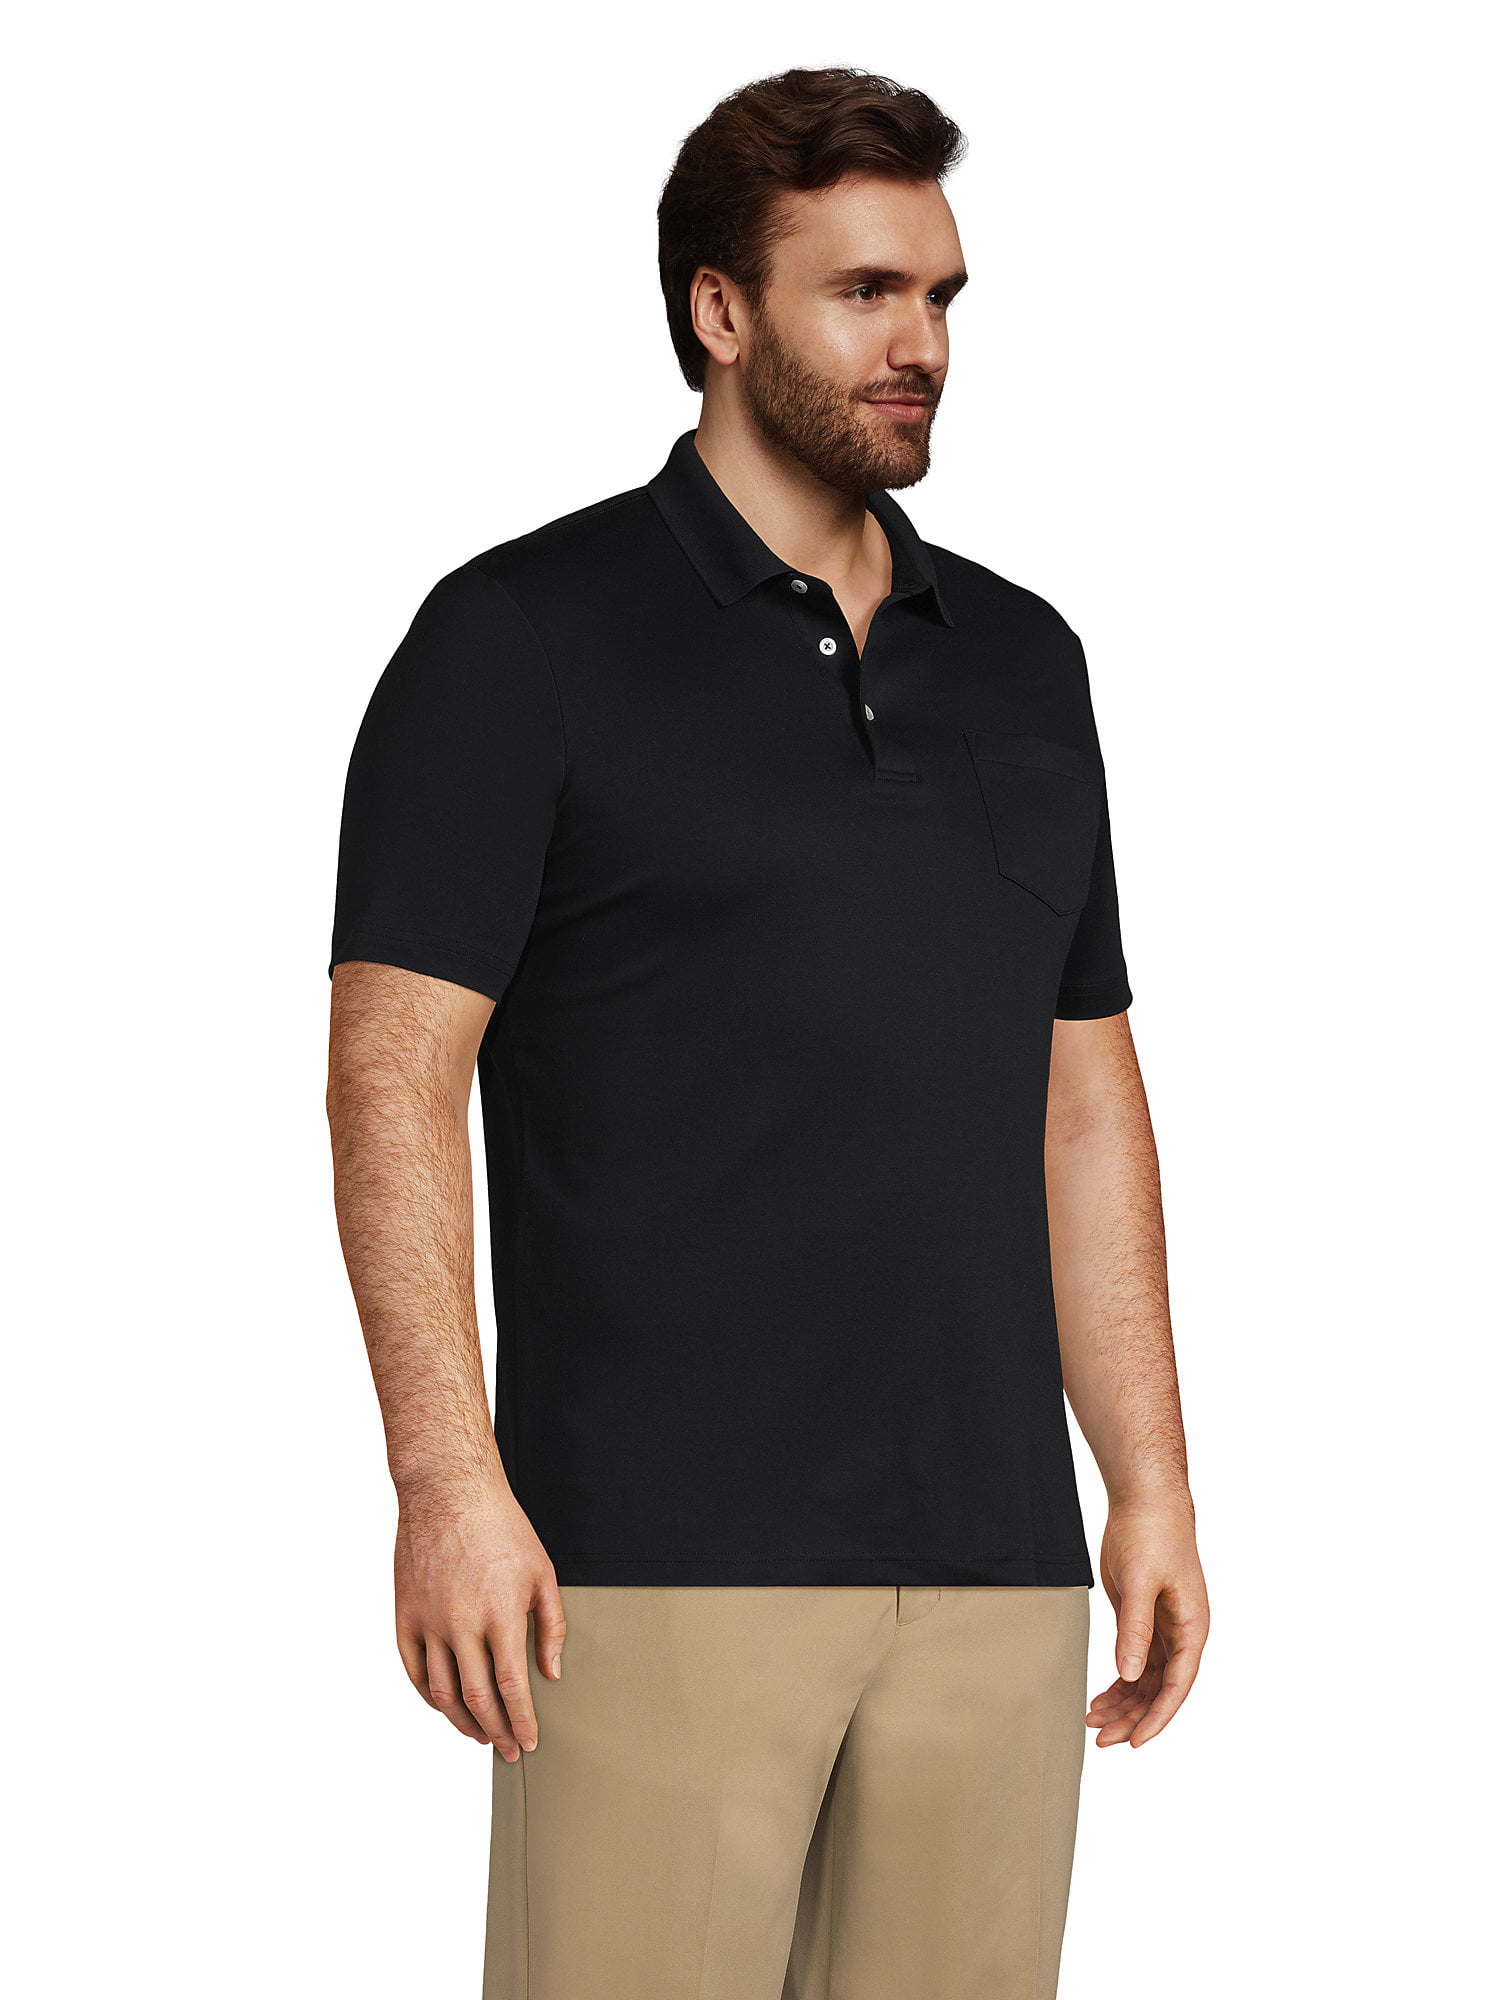 Lands' End Men's Big and Tall Short Sleeve Super Soft Supima Polo Shirt  with Pocket